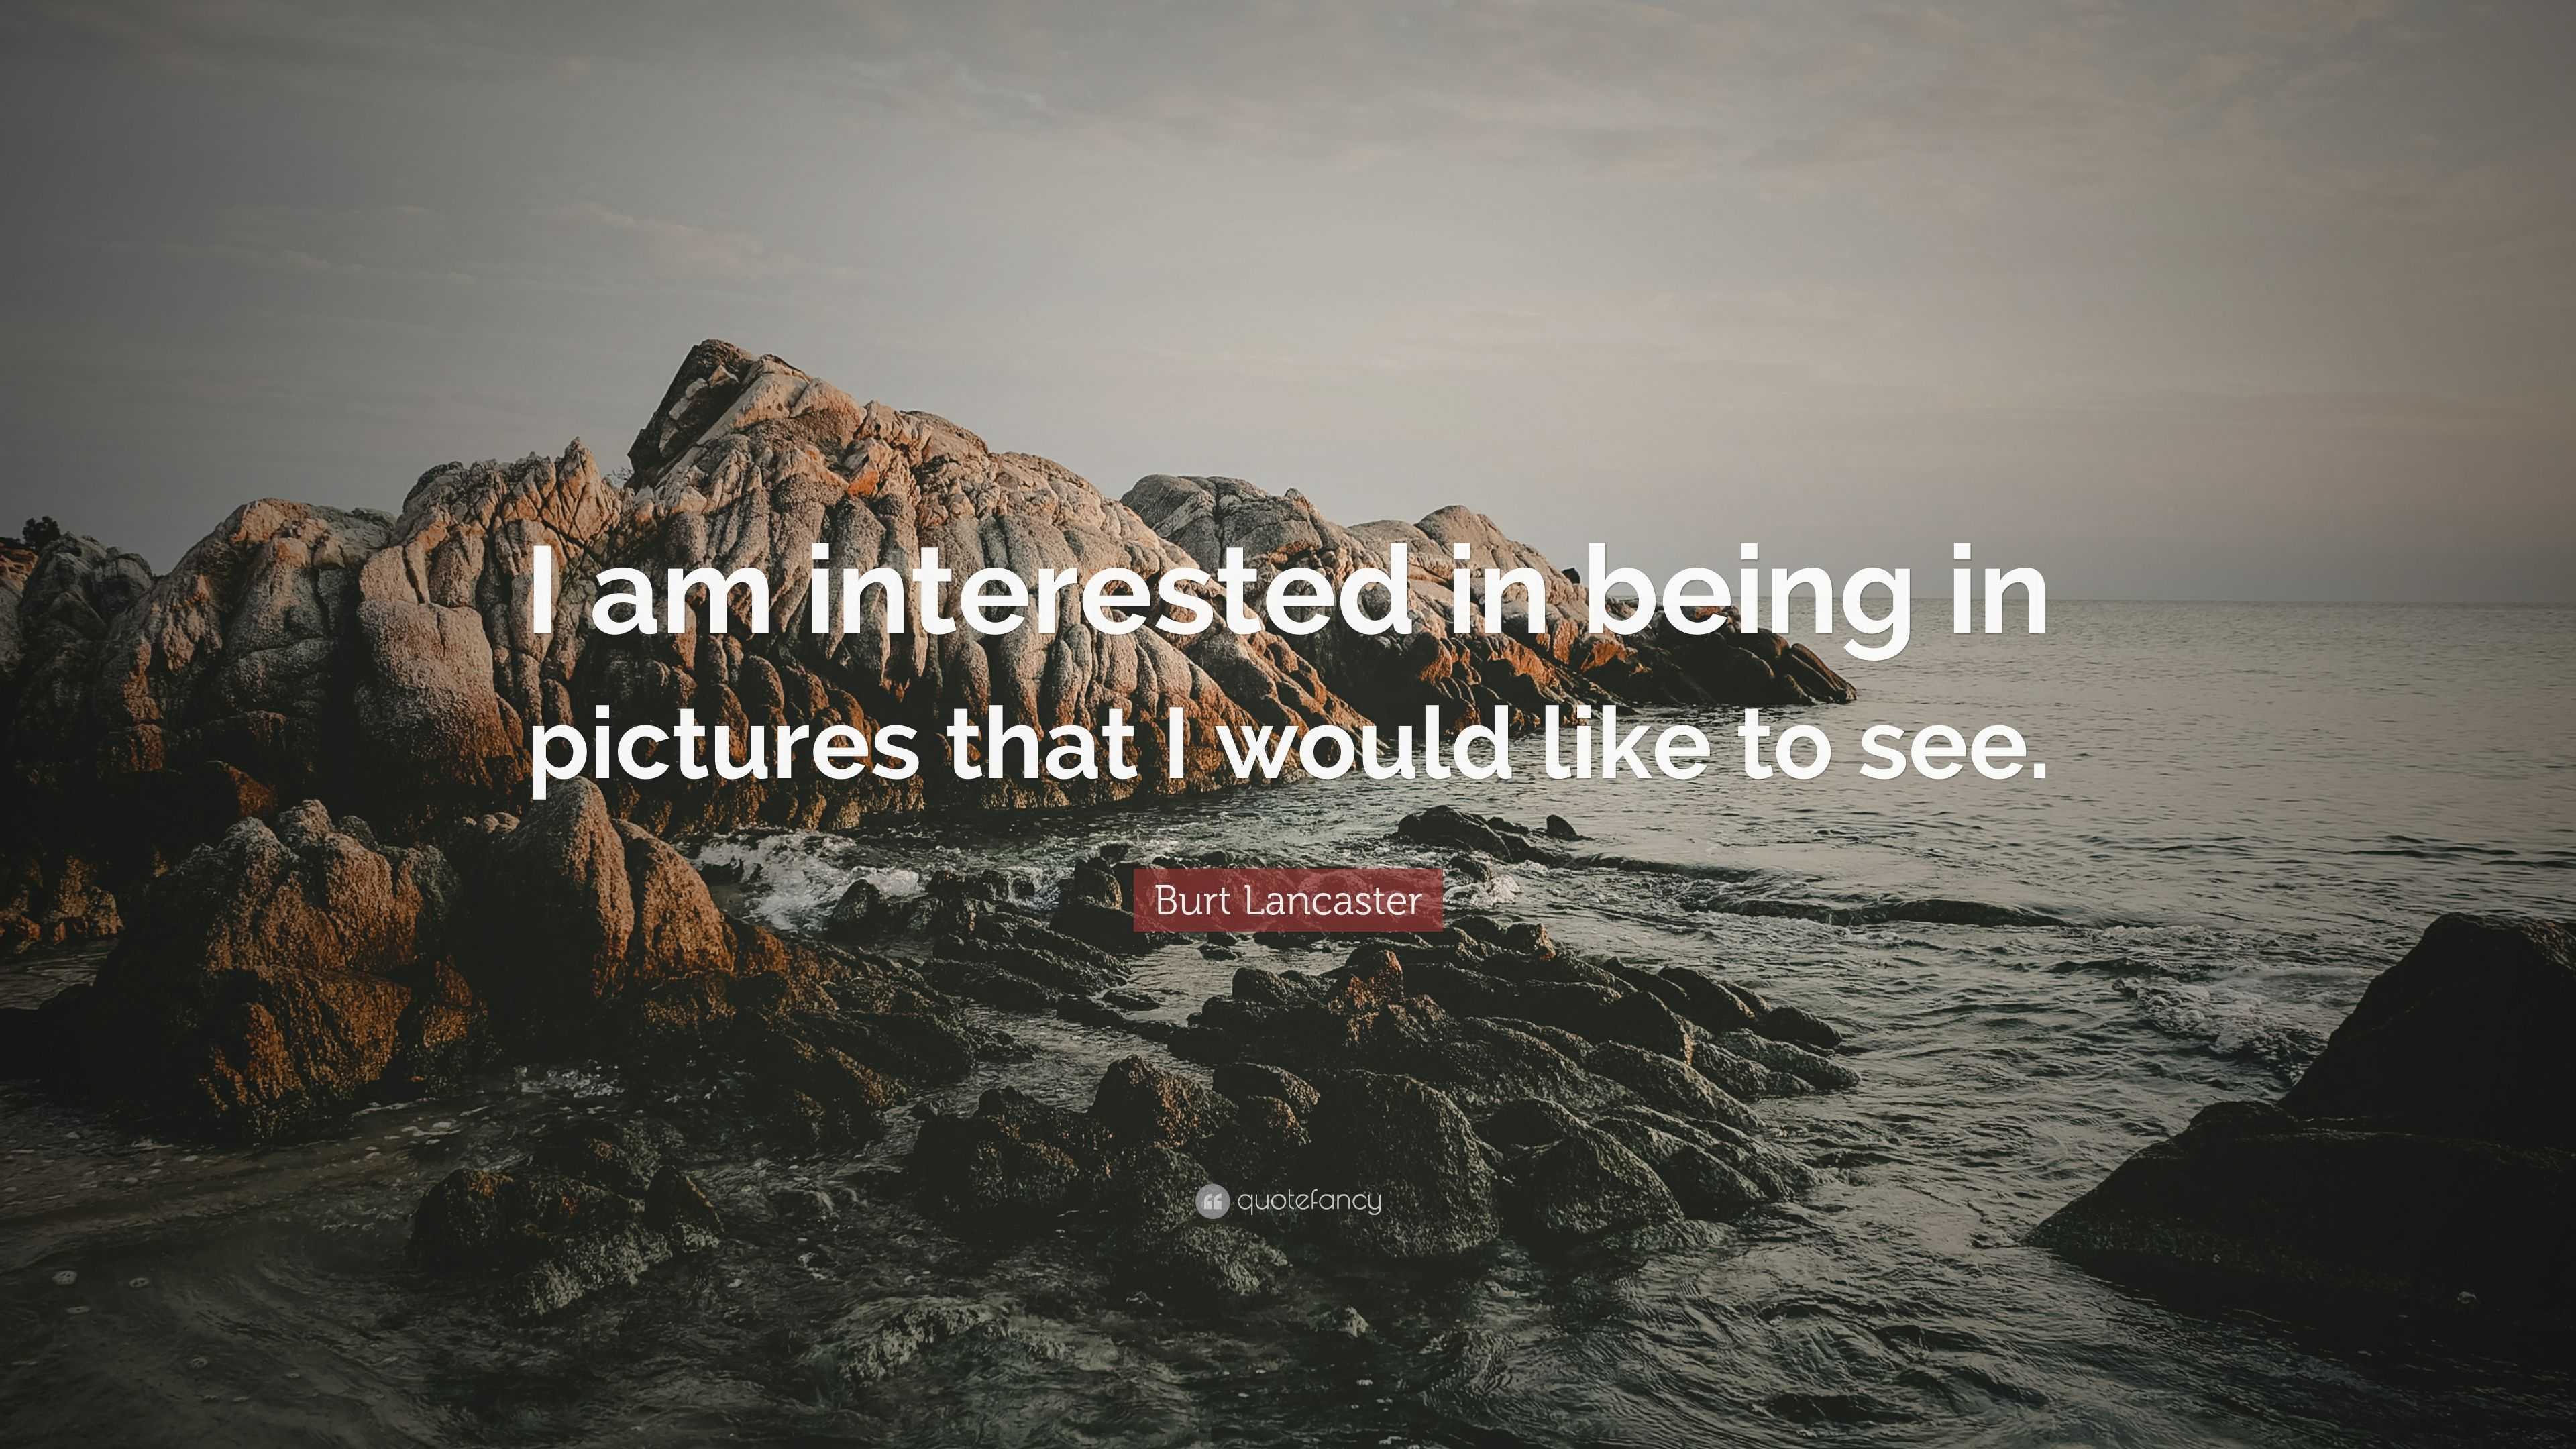 Burt Lancaster Quote: “I am interested in being in pictures that I ...